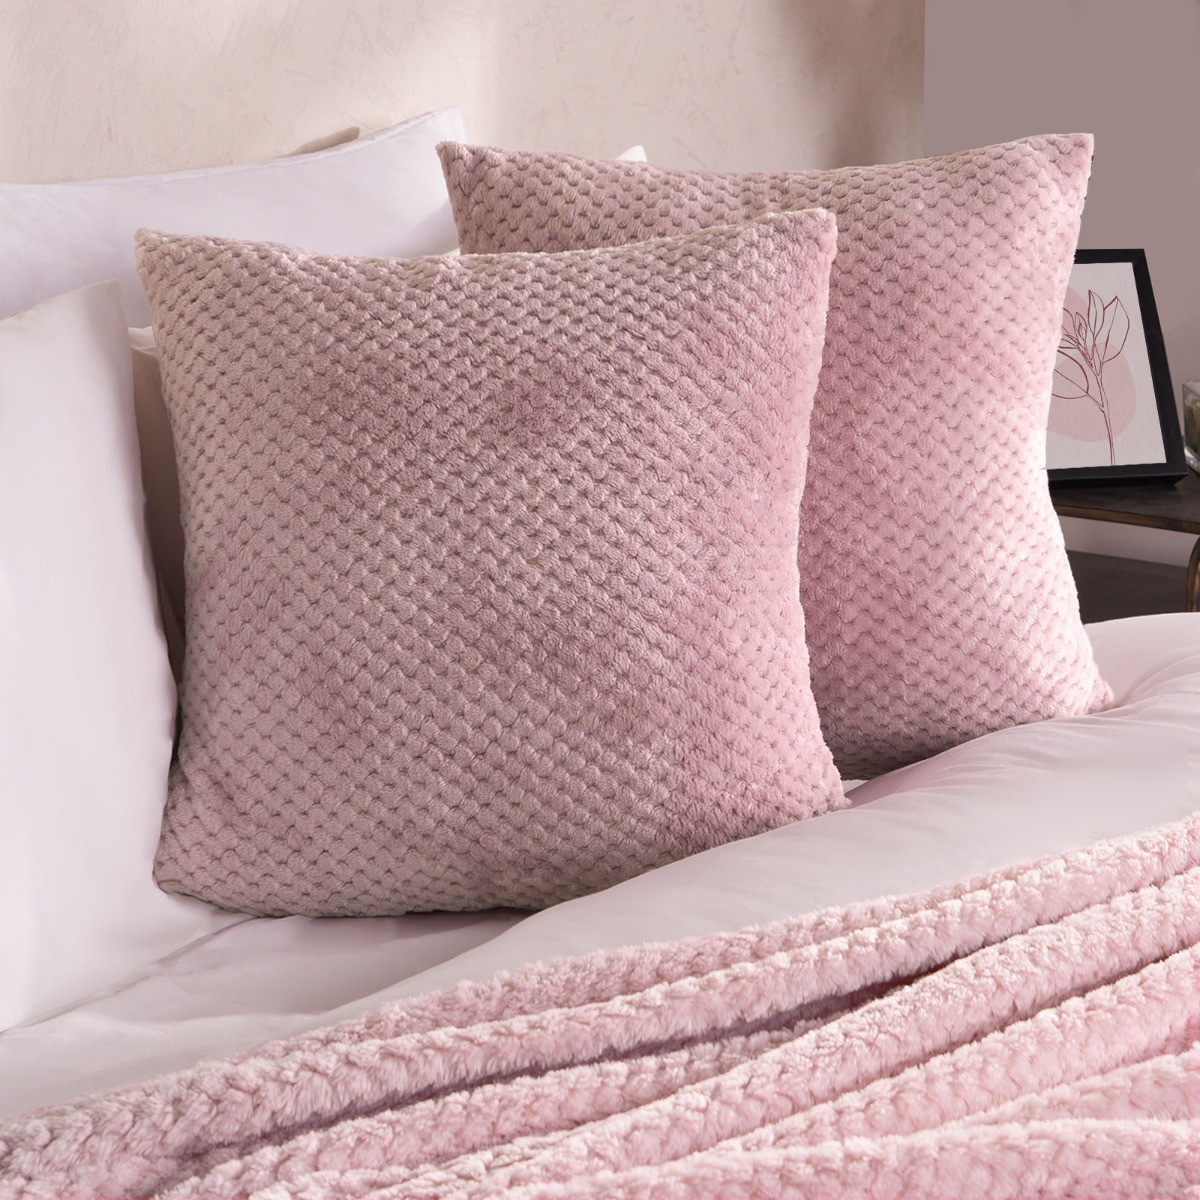 Brentfords 4 Pack Waffle Cushion Cover, Blush - With Cushion>